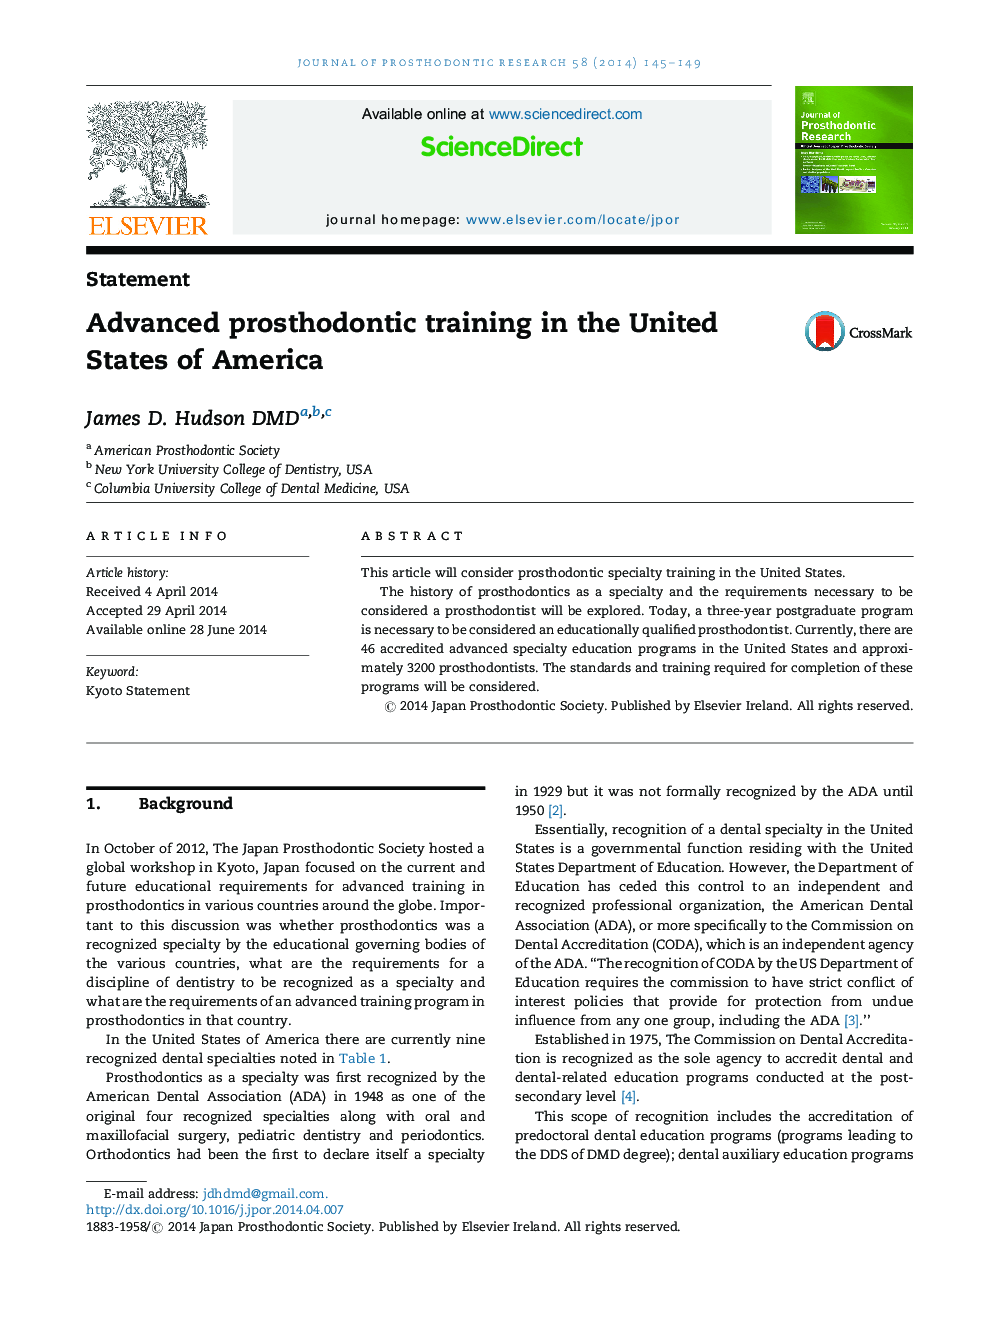 Advanced prosthodontic training in the United States of America